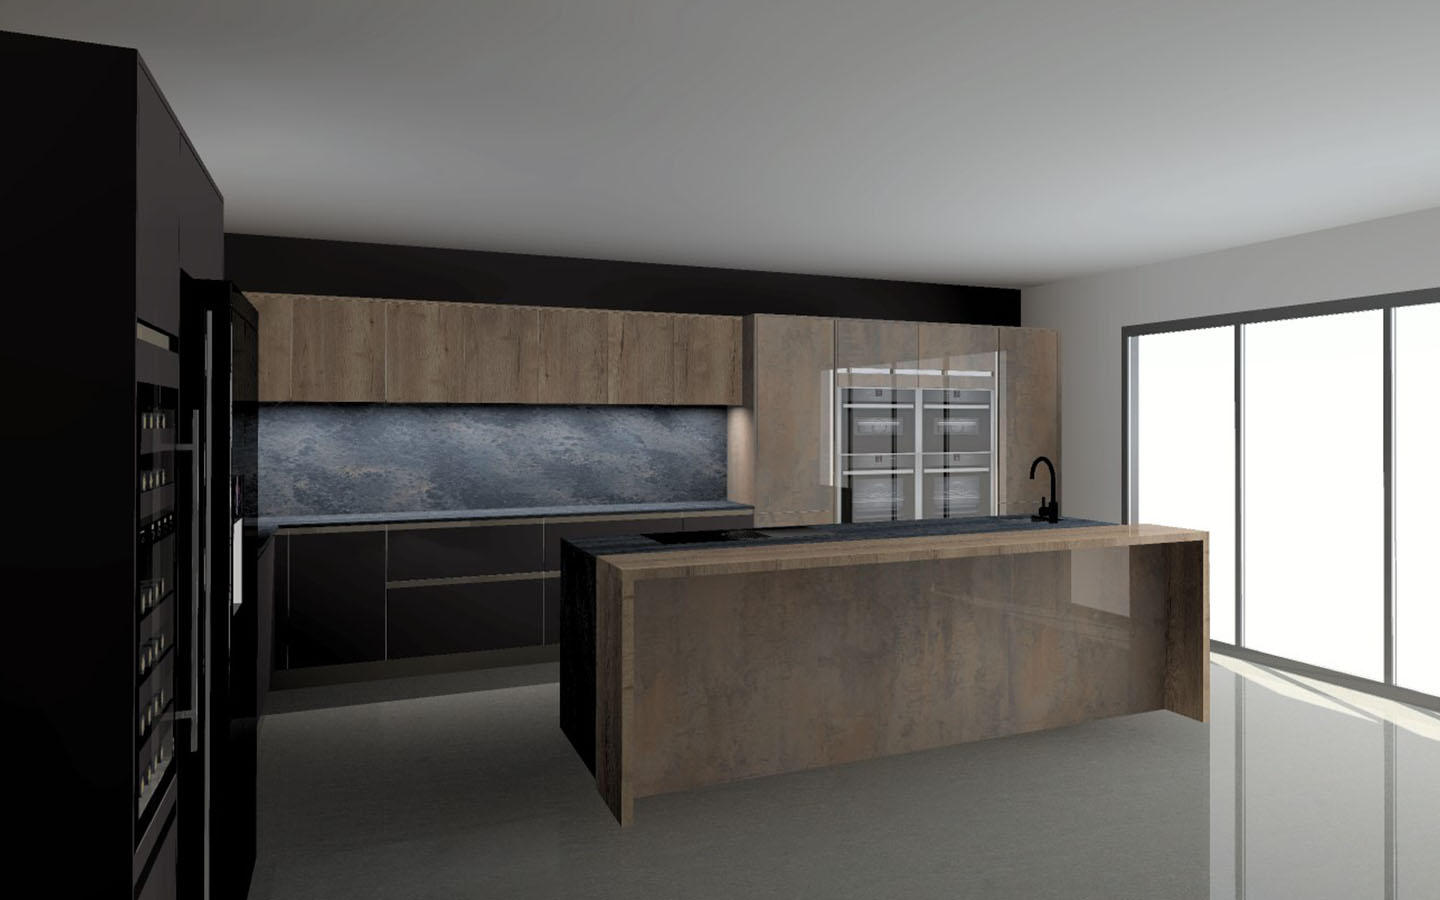 Initial design concept for the Foxes Maltings using Caesarstone 5820 Darcrest